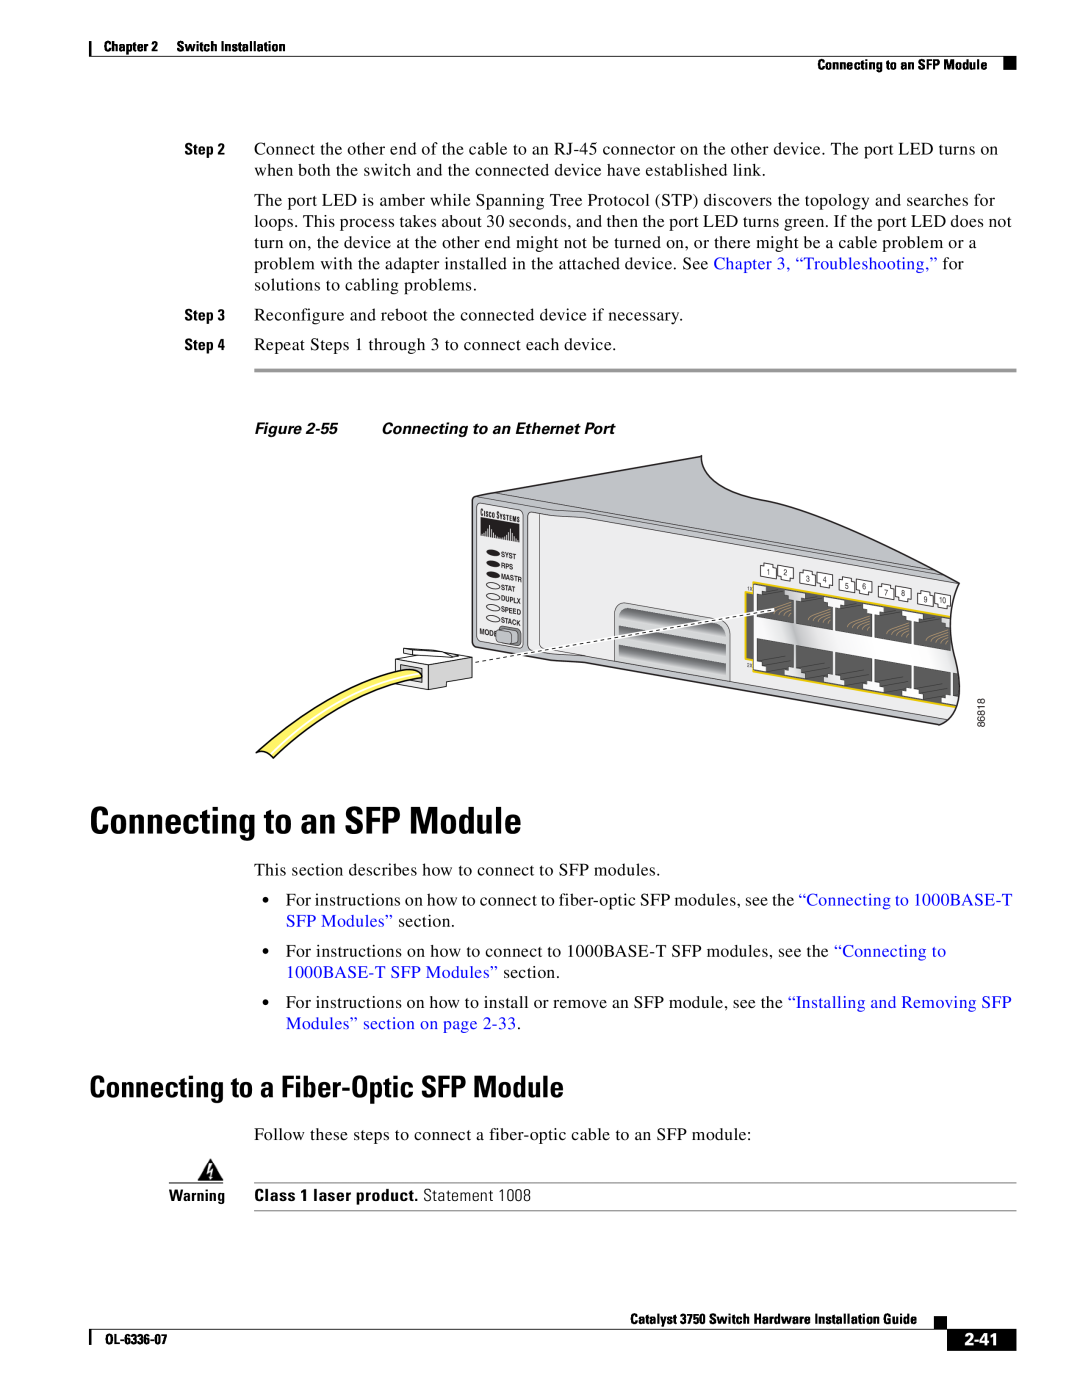 Cisco Systems WSC3750X24TS specifications Connecting to an SFP Module, Connecting to a Fiber-Optic SFP Module, 2-41 